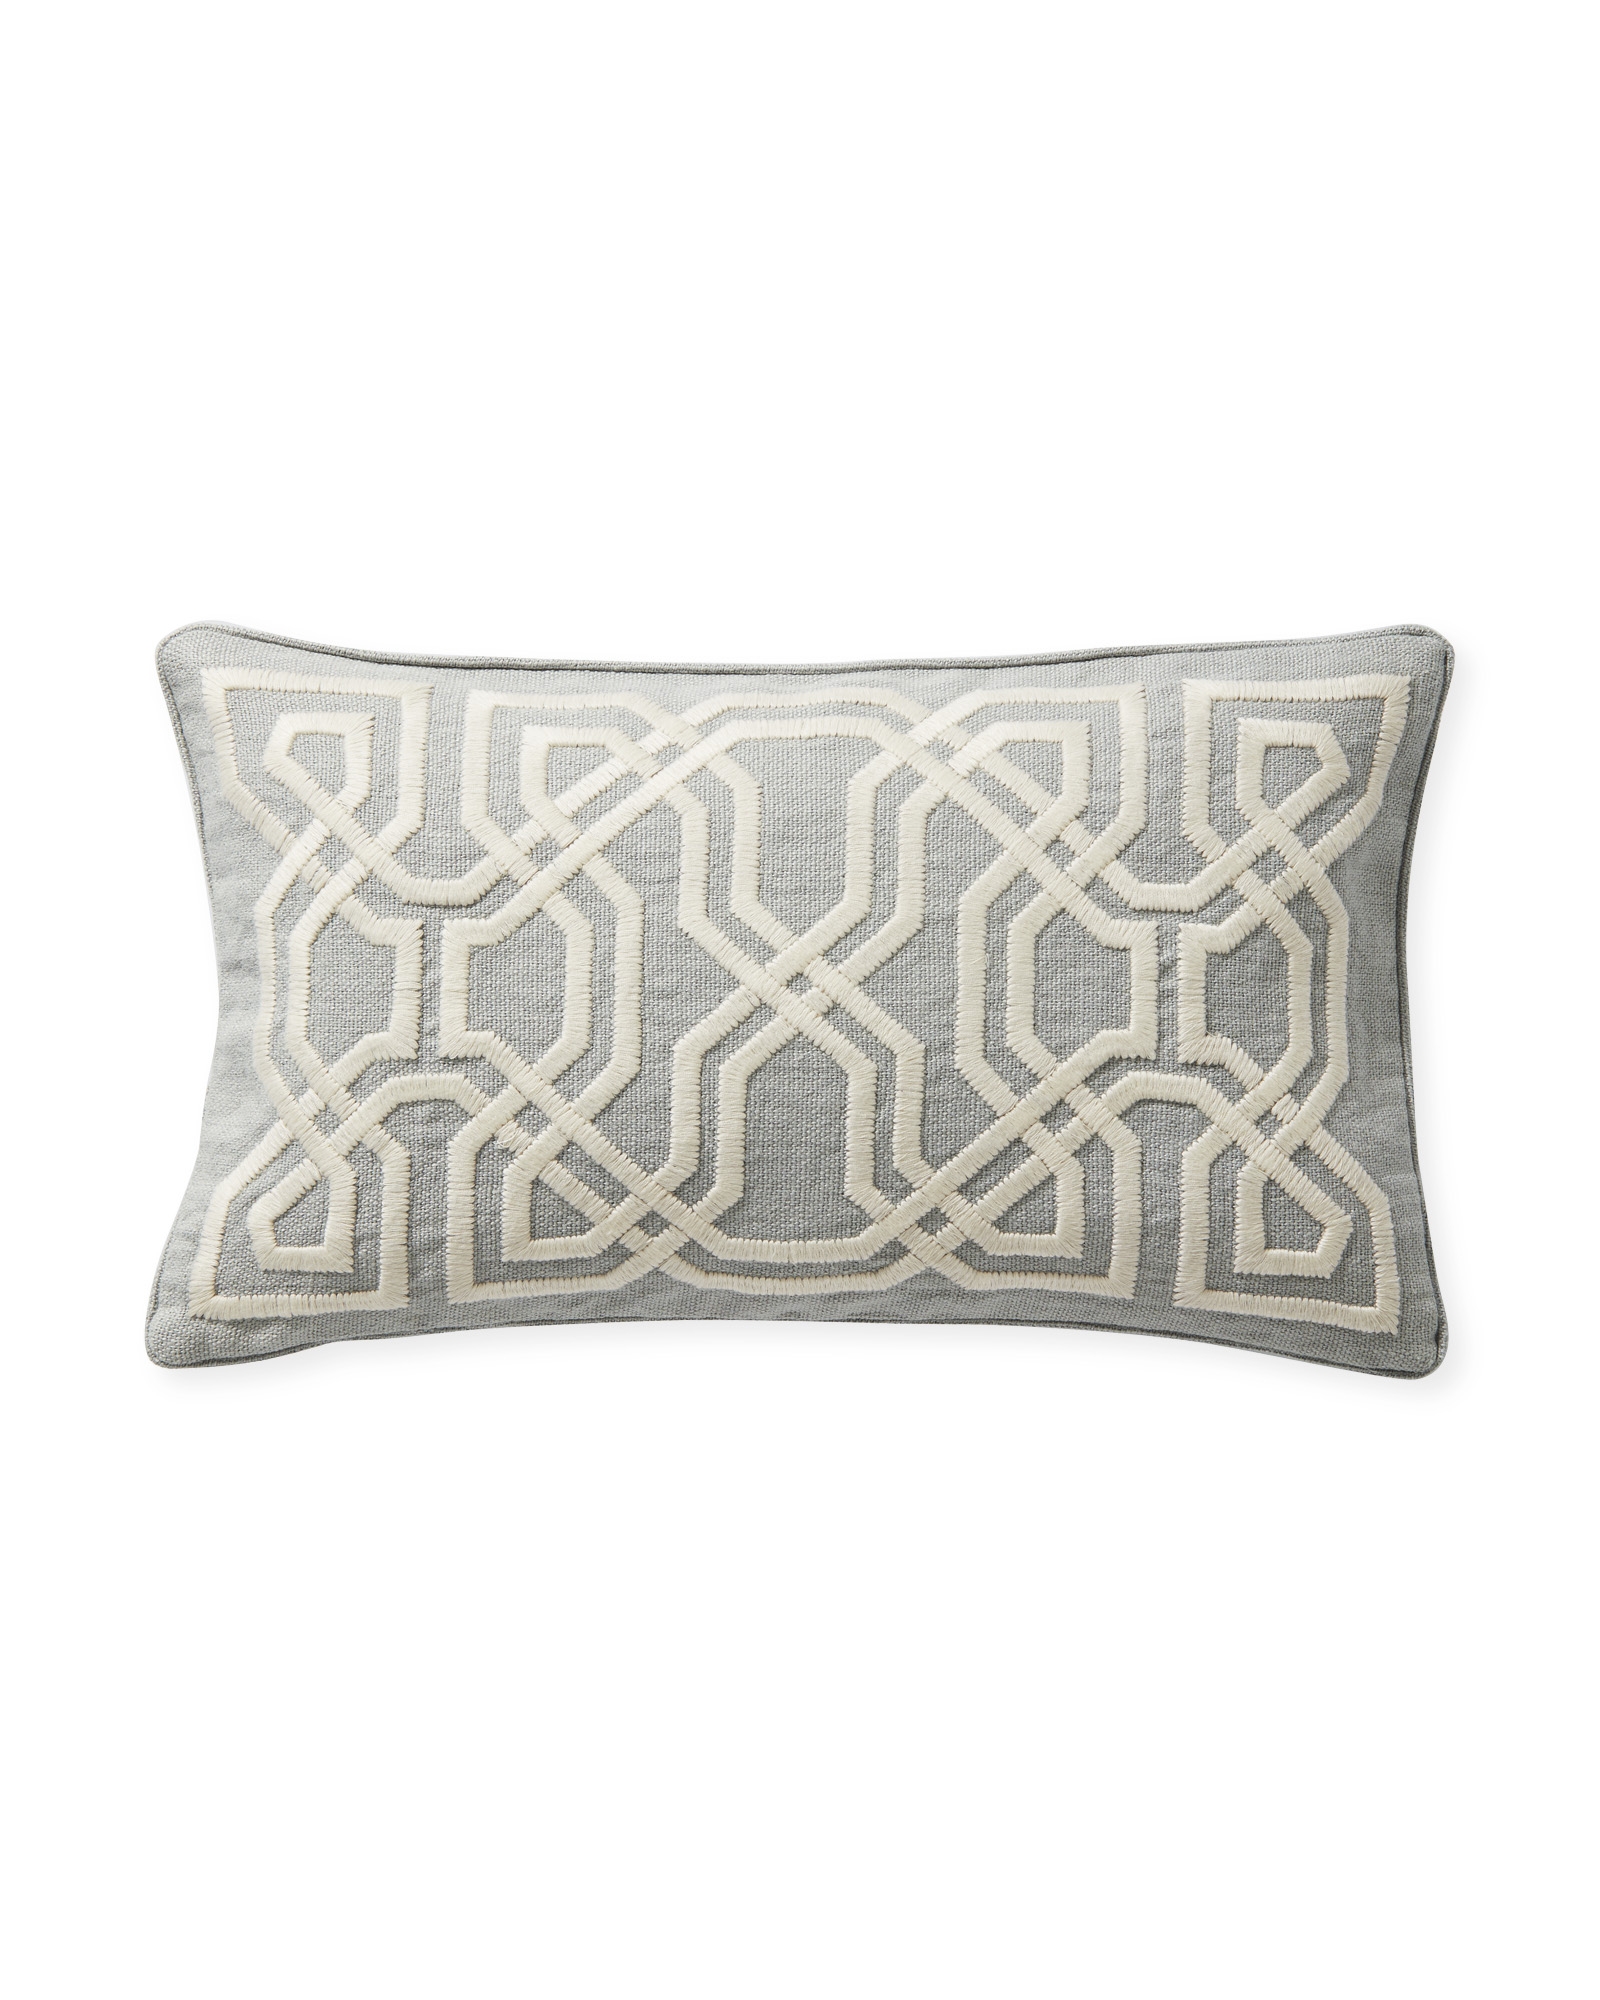 Jetty Pillow Cover - Smoke - Insert sold separately - Image 0